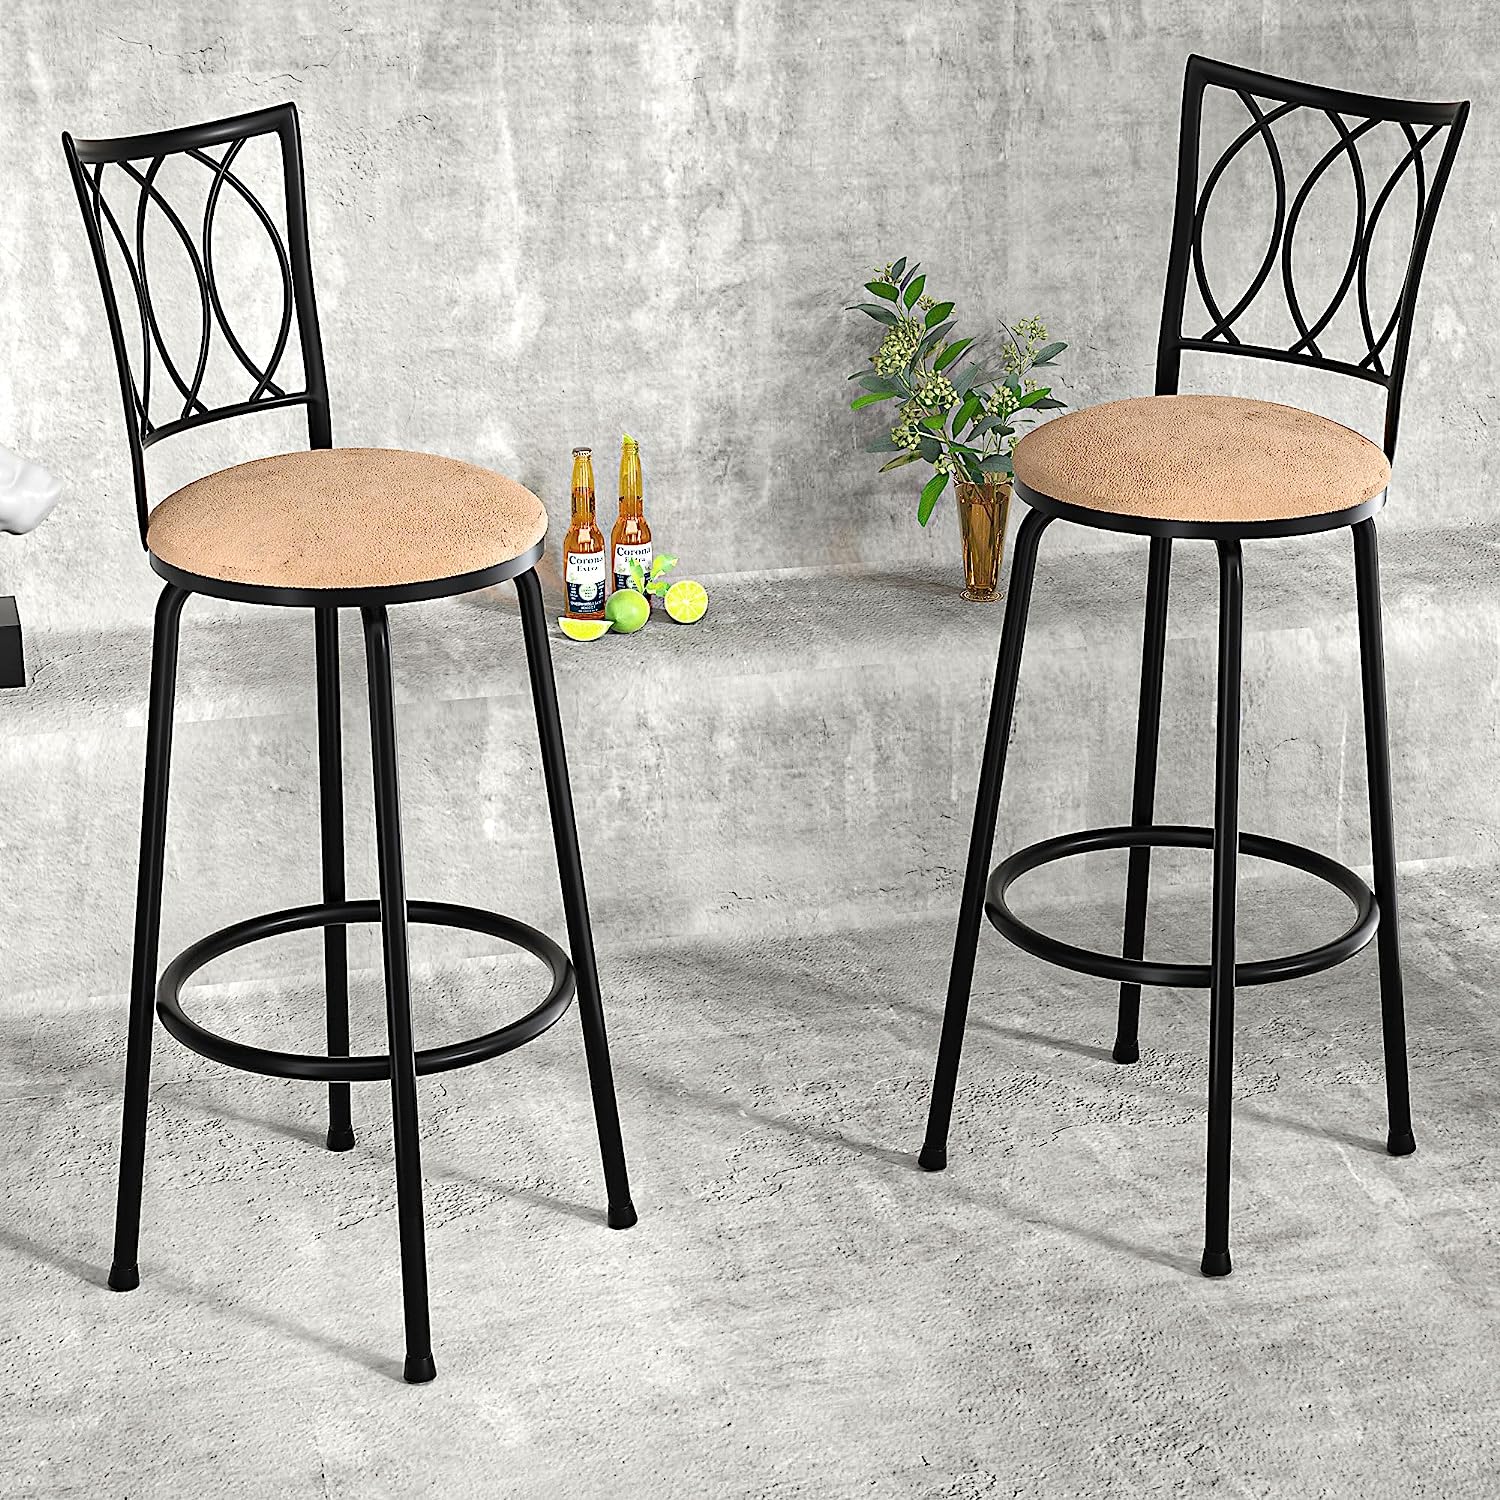 VECELO Swivel Adjustable Counter/Bar Stools with Curved Pattern Backrest Set of 2 for Kitchen